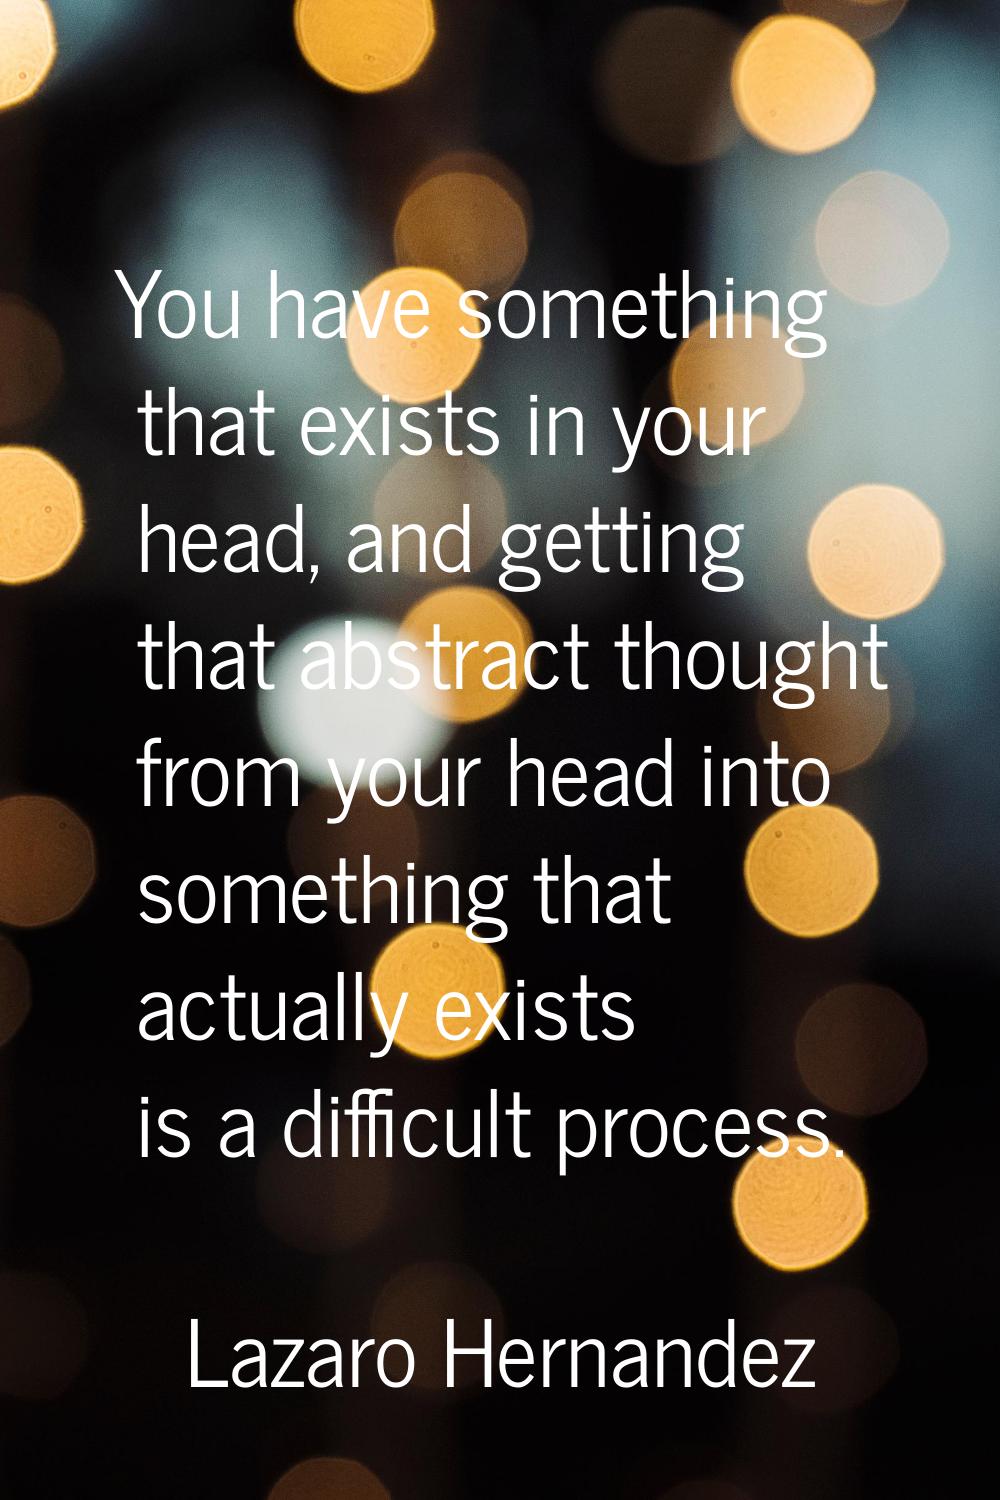 You have something that exists in your head, and getting that abstract thought from your head into 